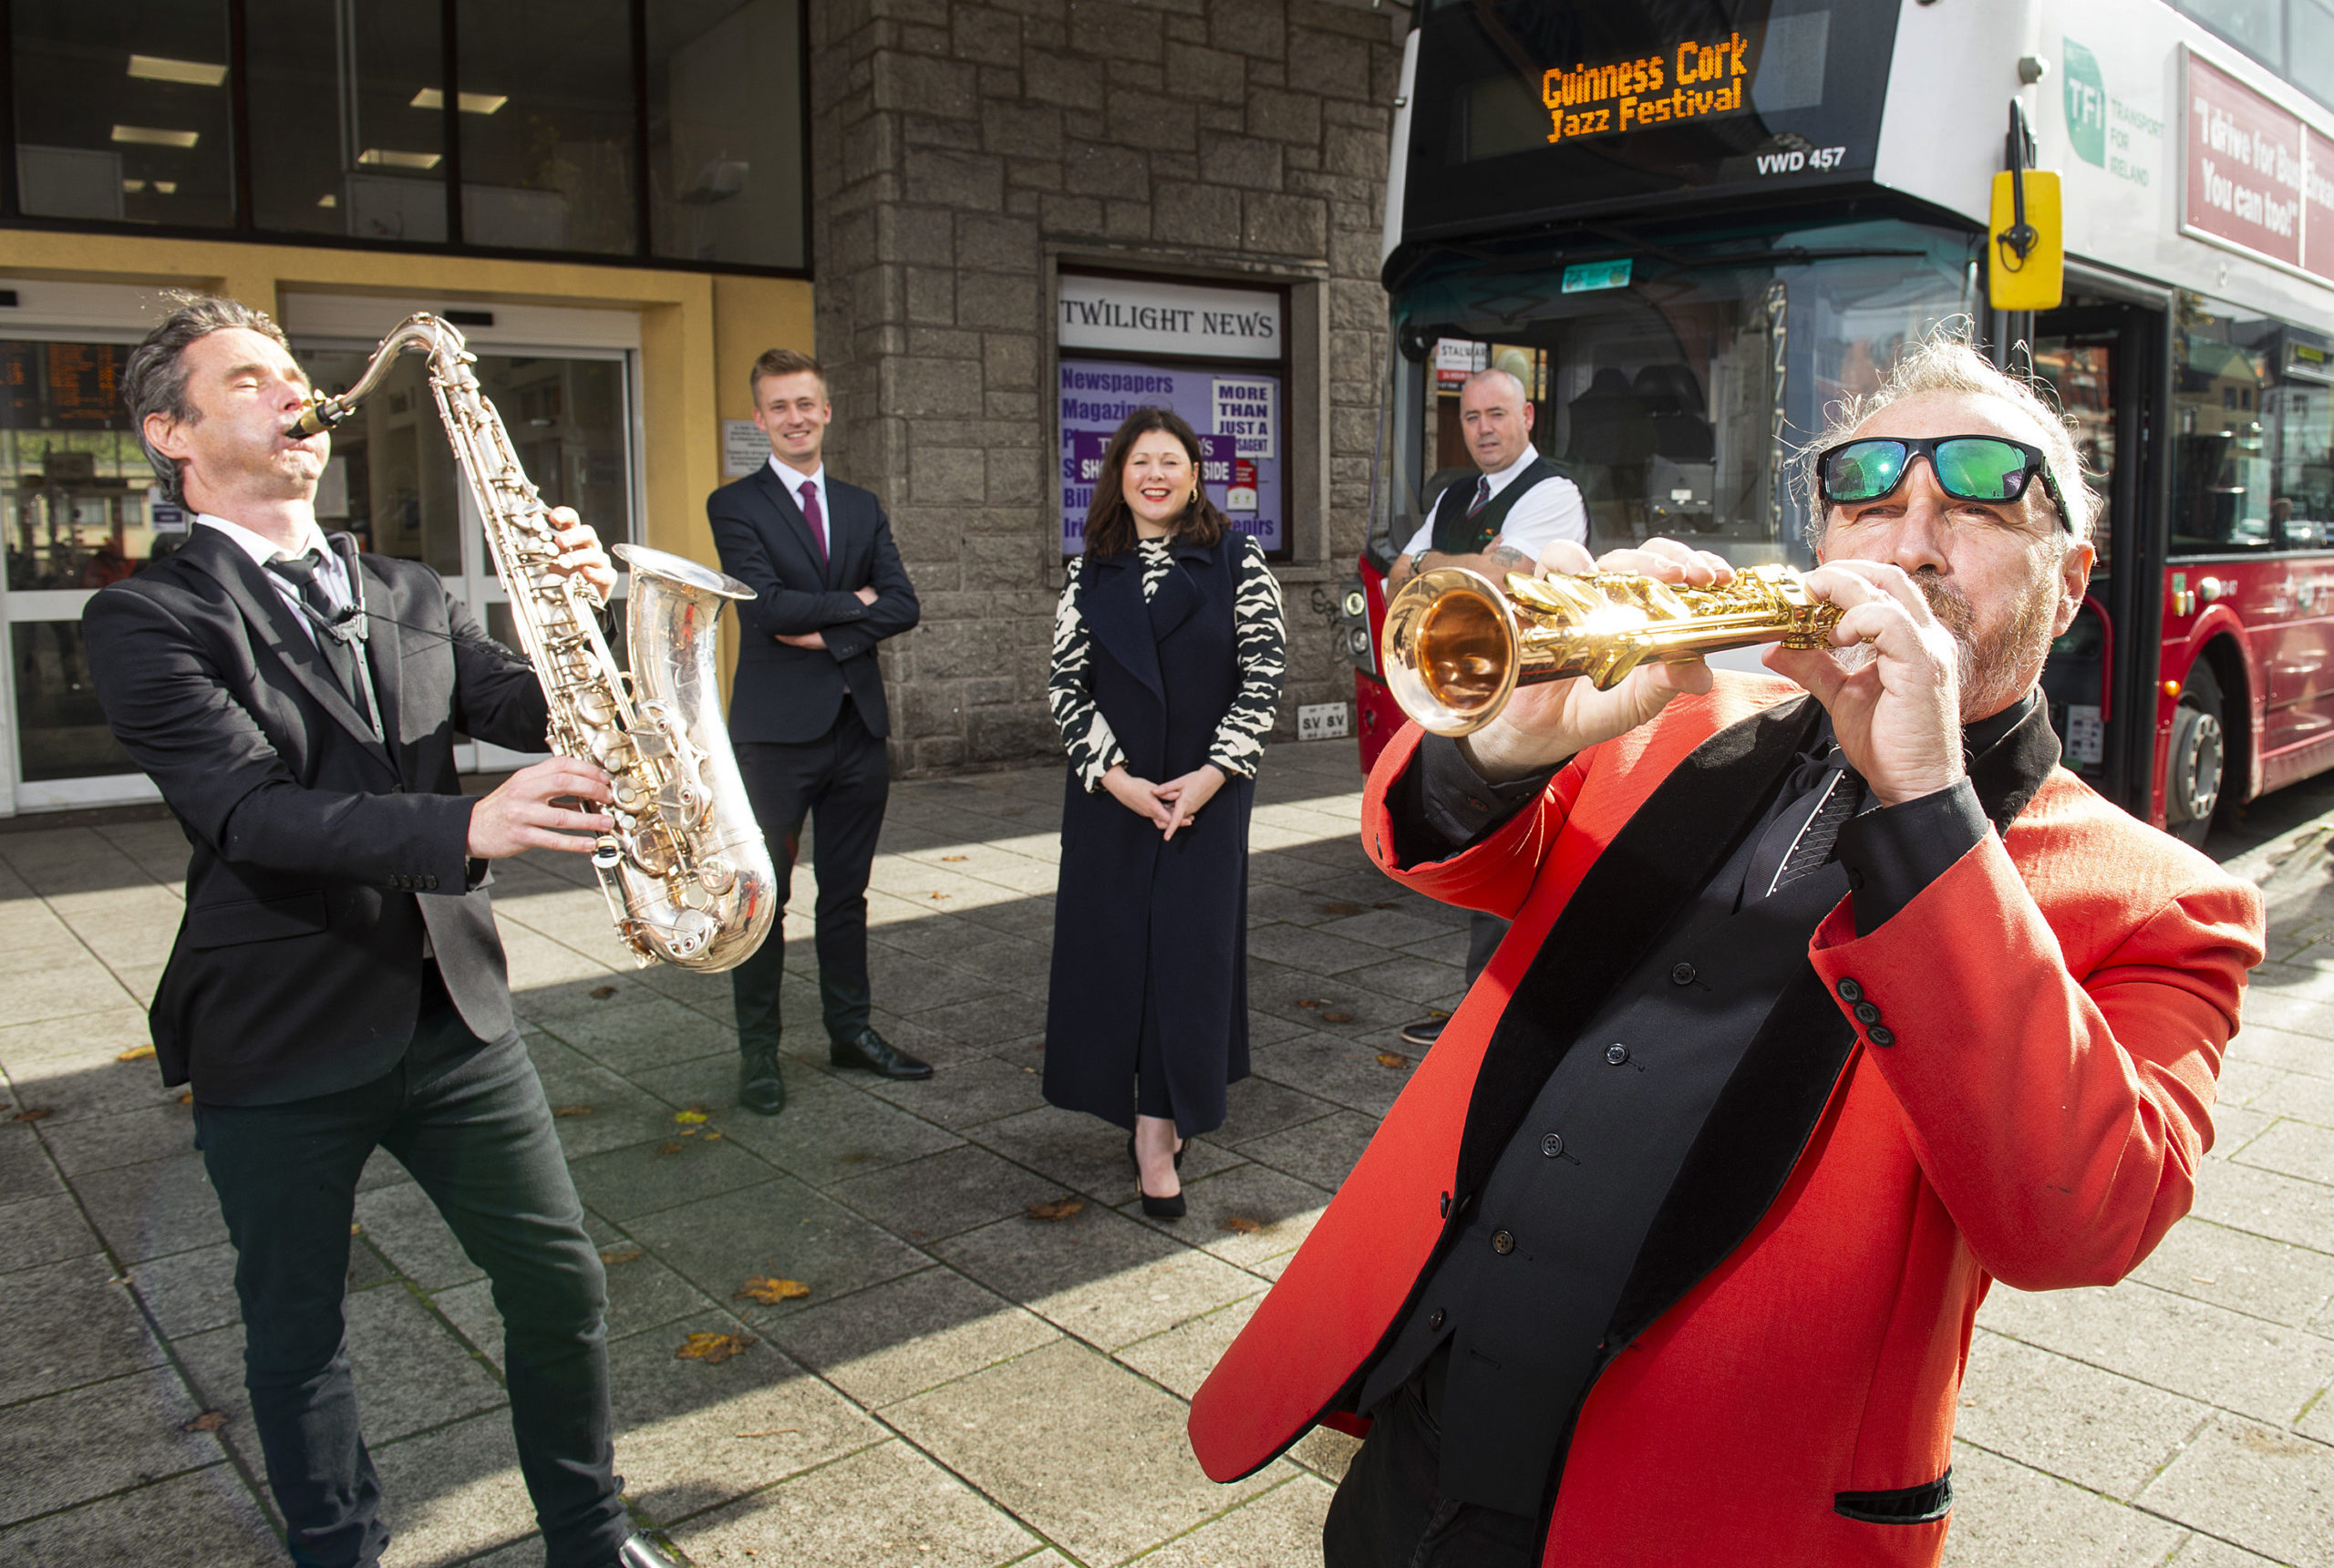 Bus Éireann encourages jazz-lovers to take the bus to the Guinness Cork ...